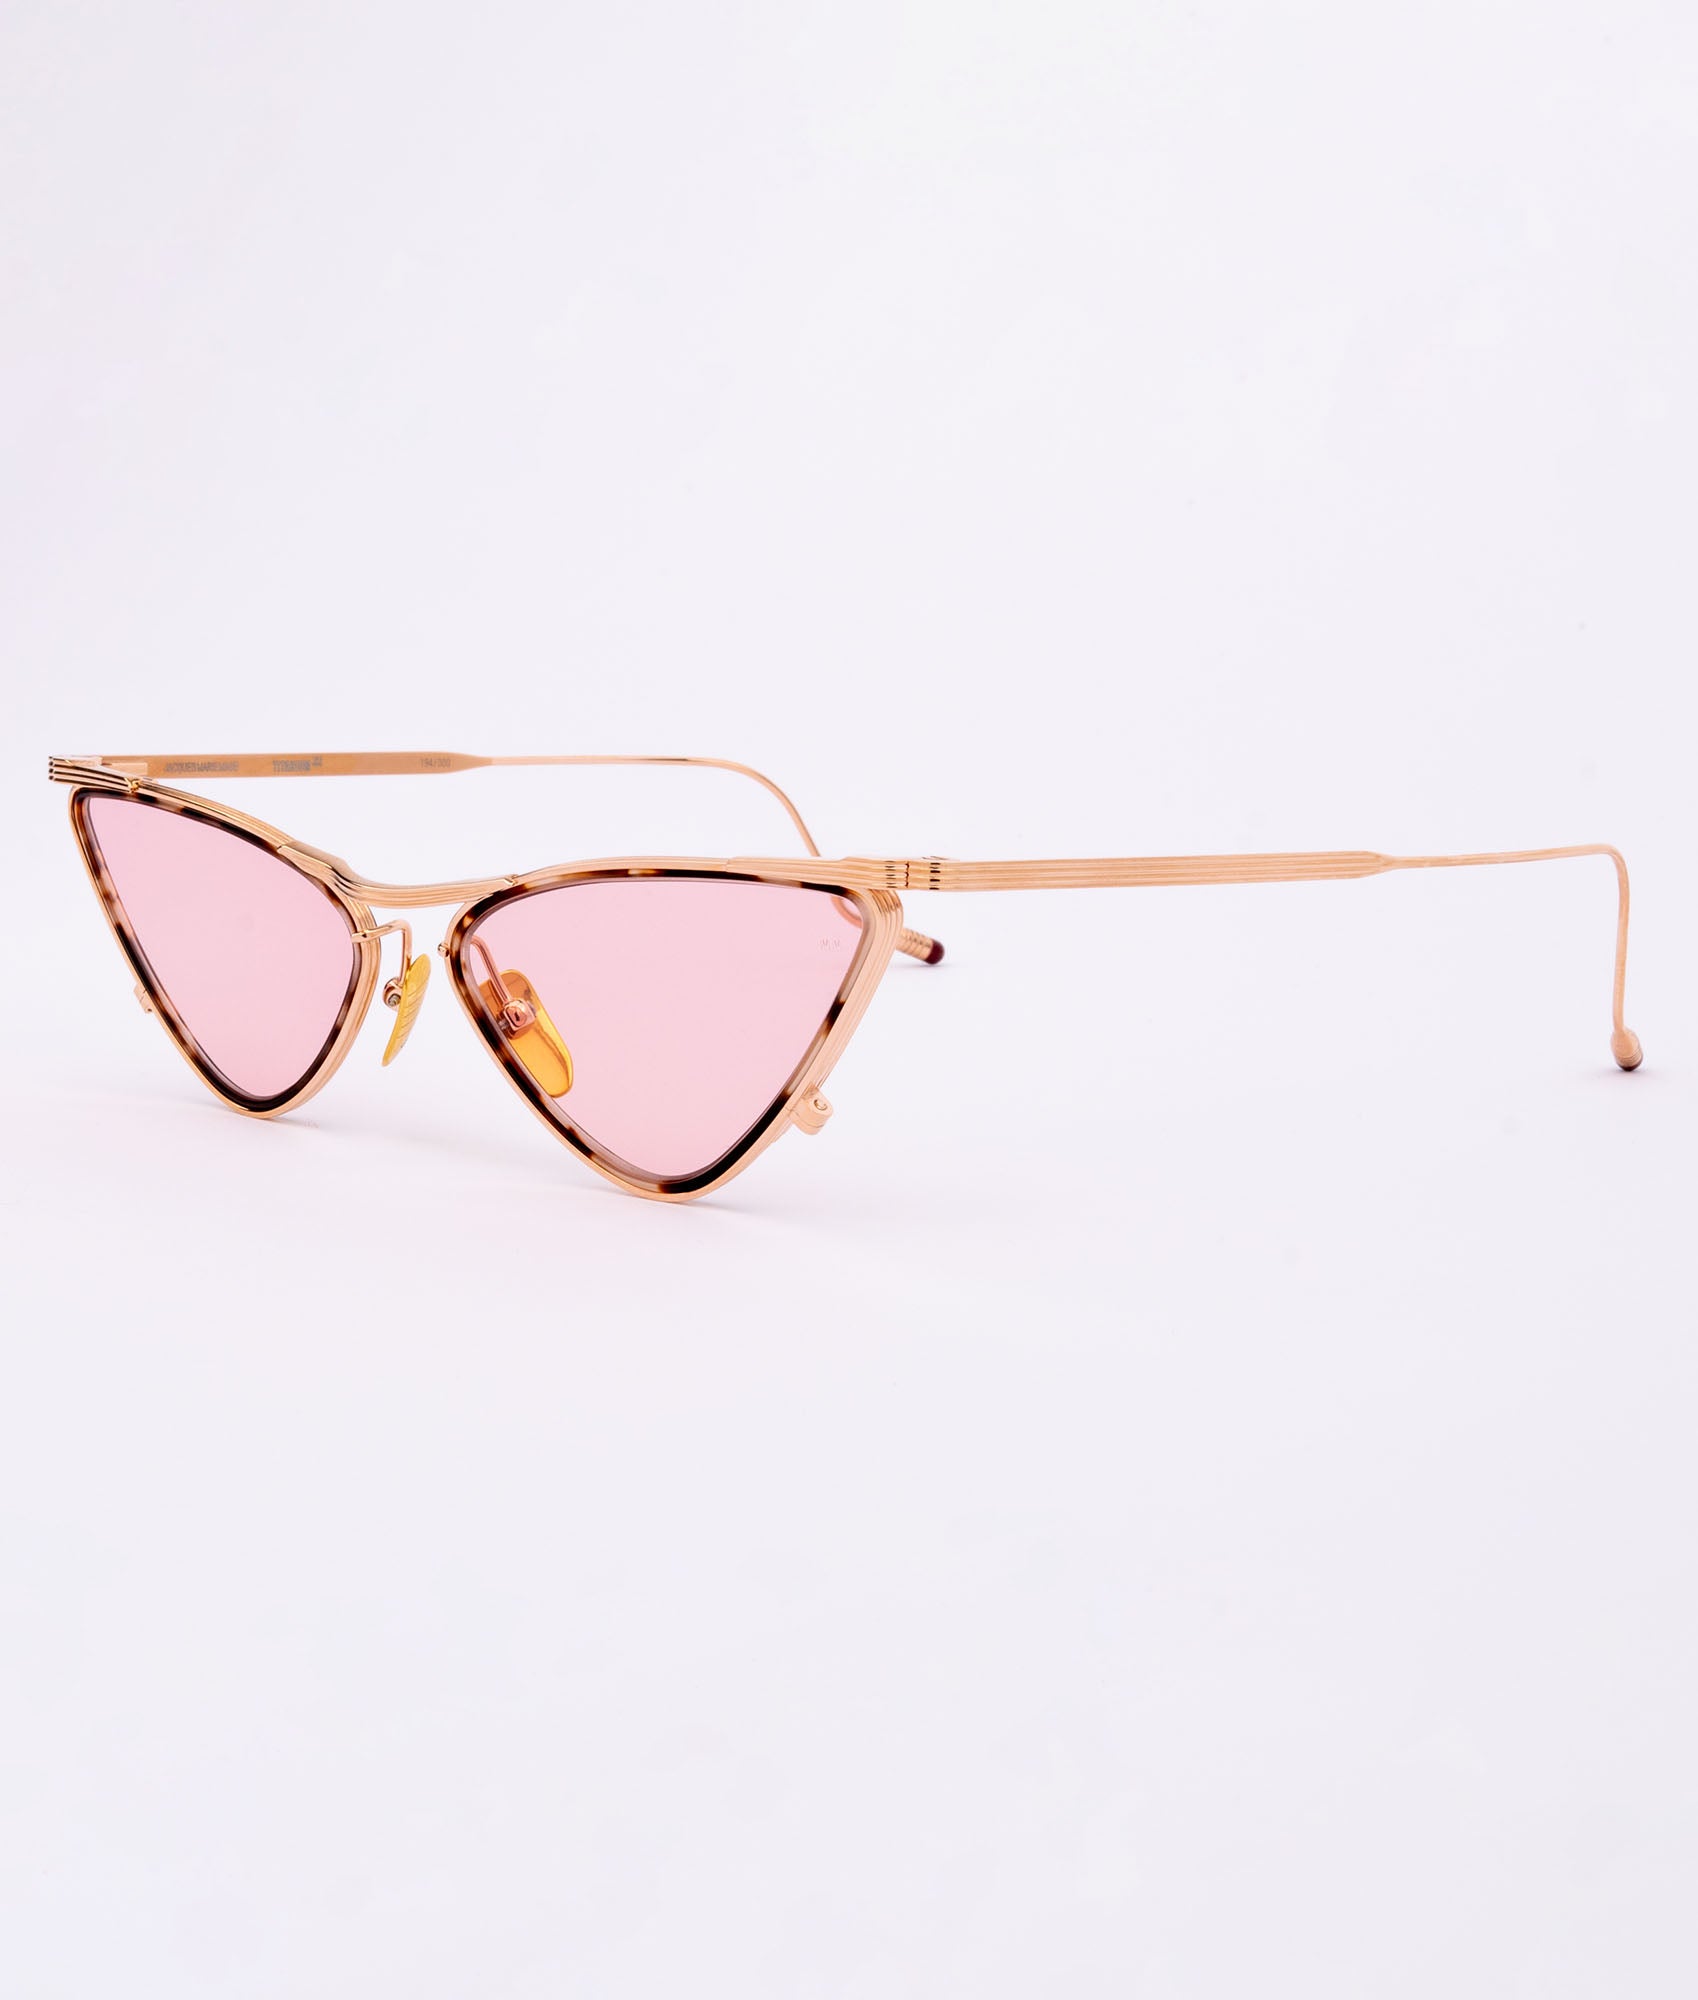 Jacques Marie Mage | NIKI / NUDE GOLD/PINK / 54/16/140